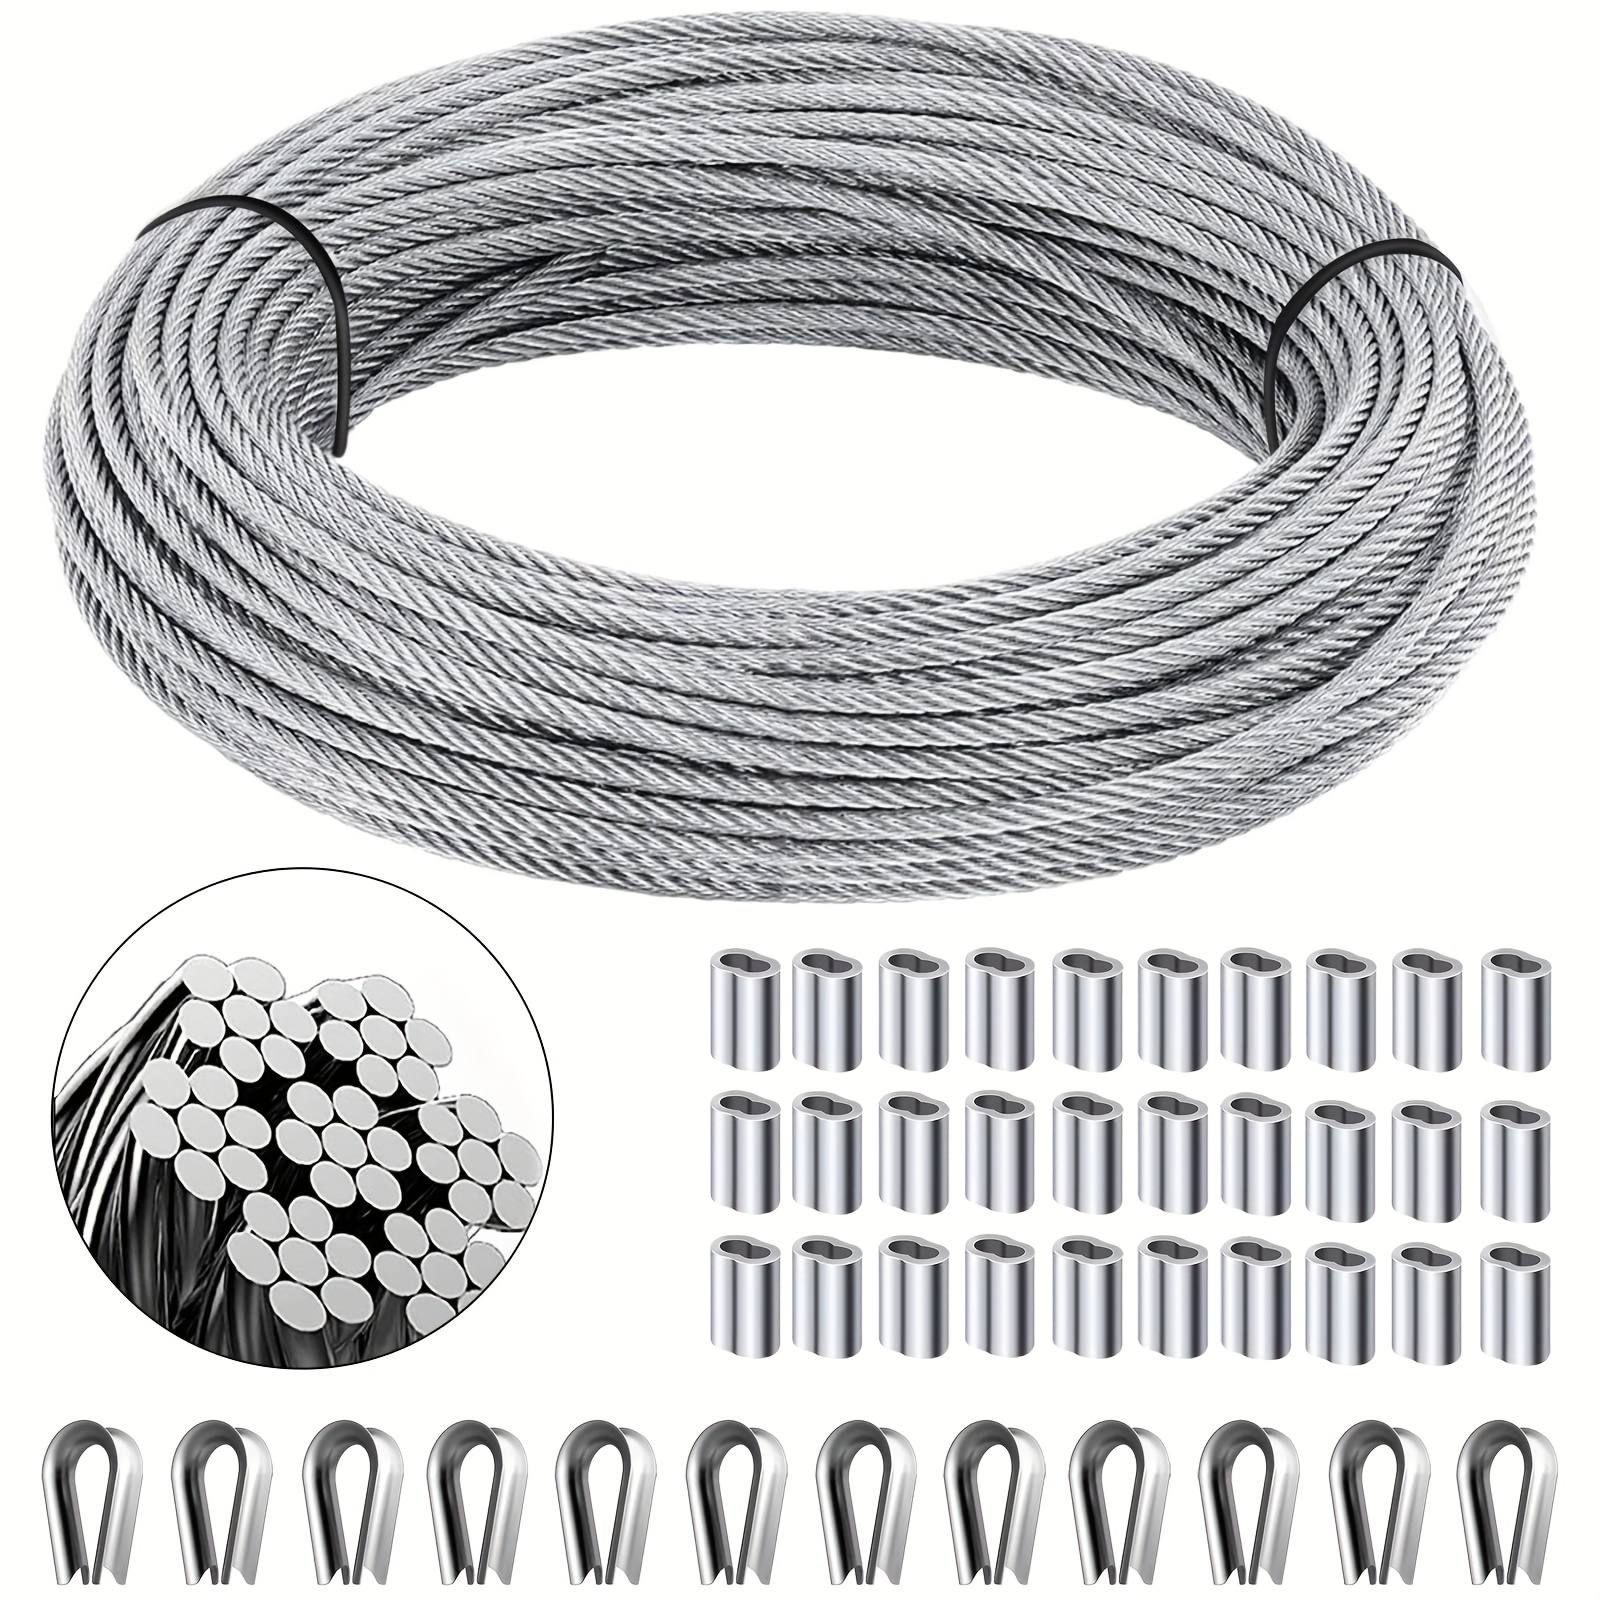 1set Wire Rope,Rope Aircraft Cable Wire Rope With Cable Hooks Stainless  Steel Turnbuckle Cord Hanging Kit Home Supplies